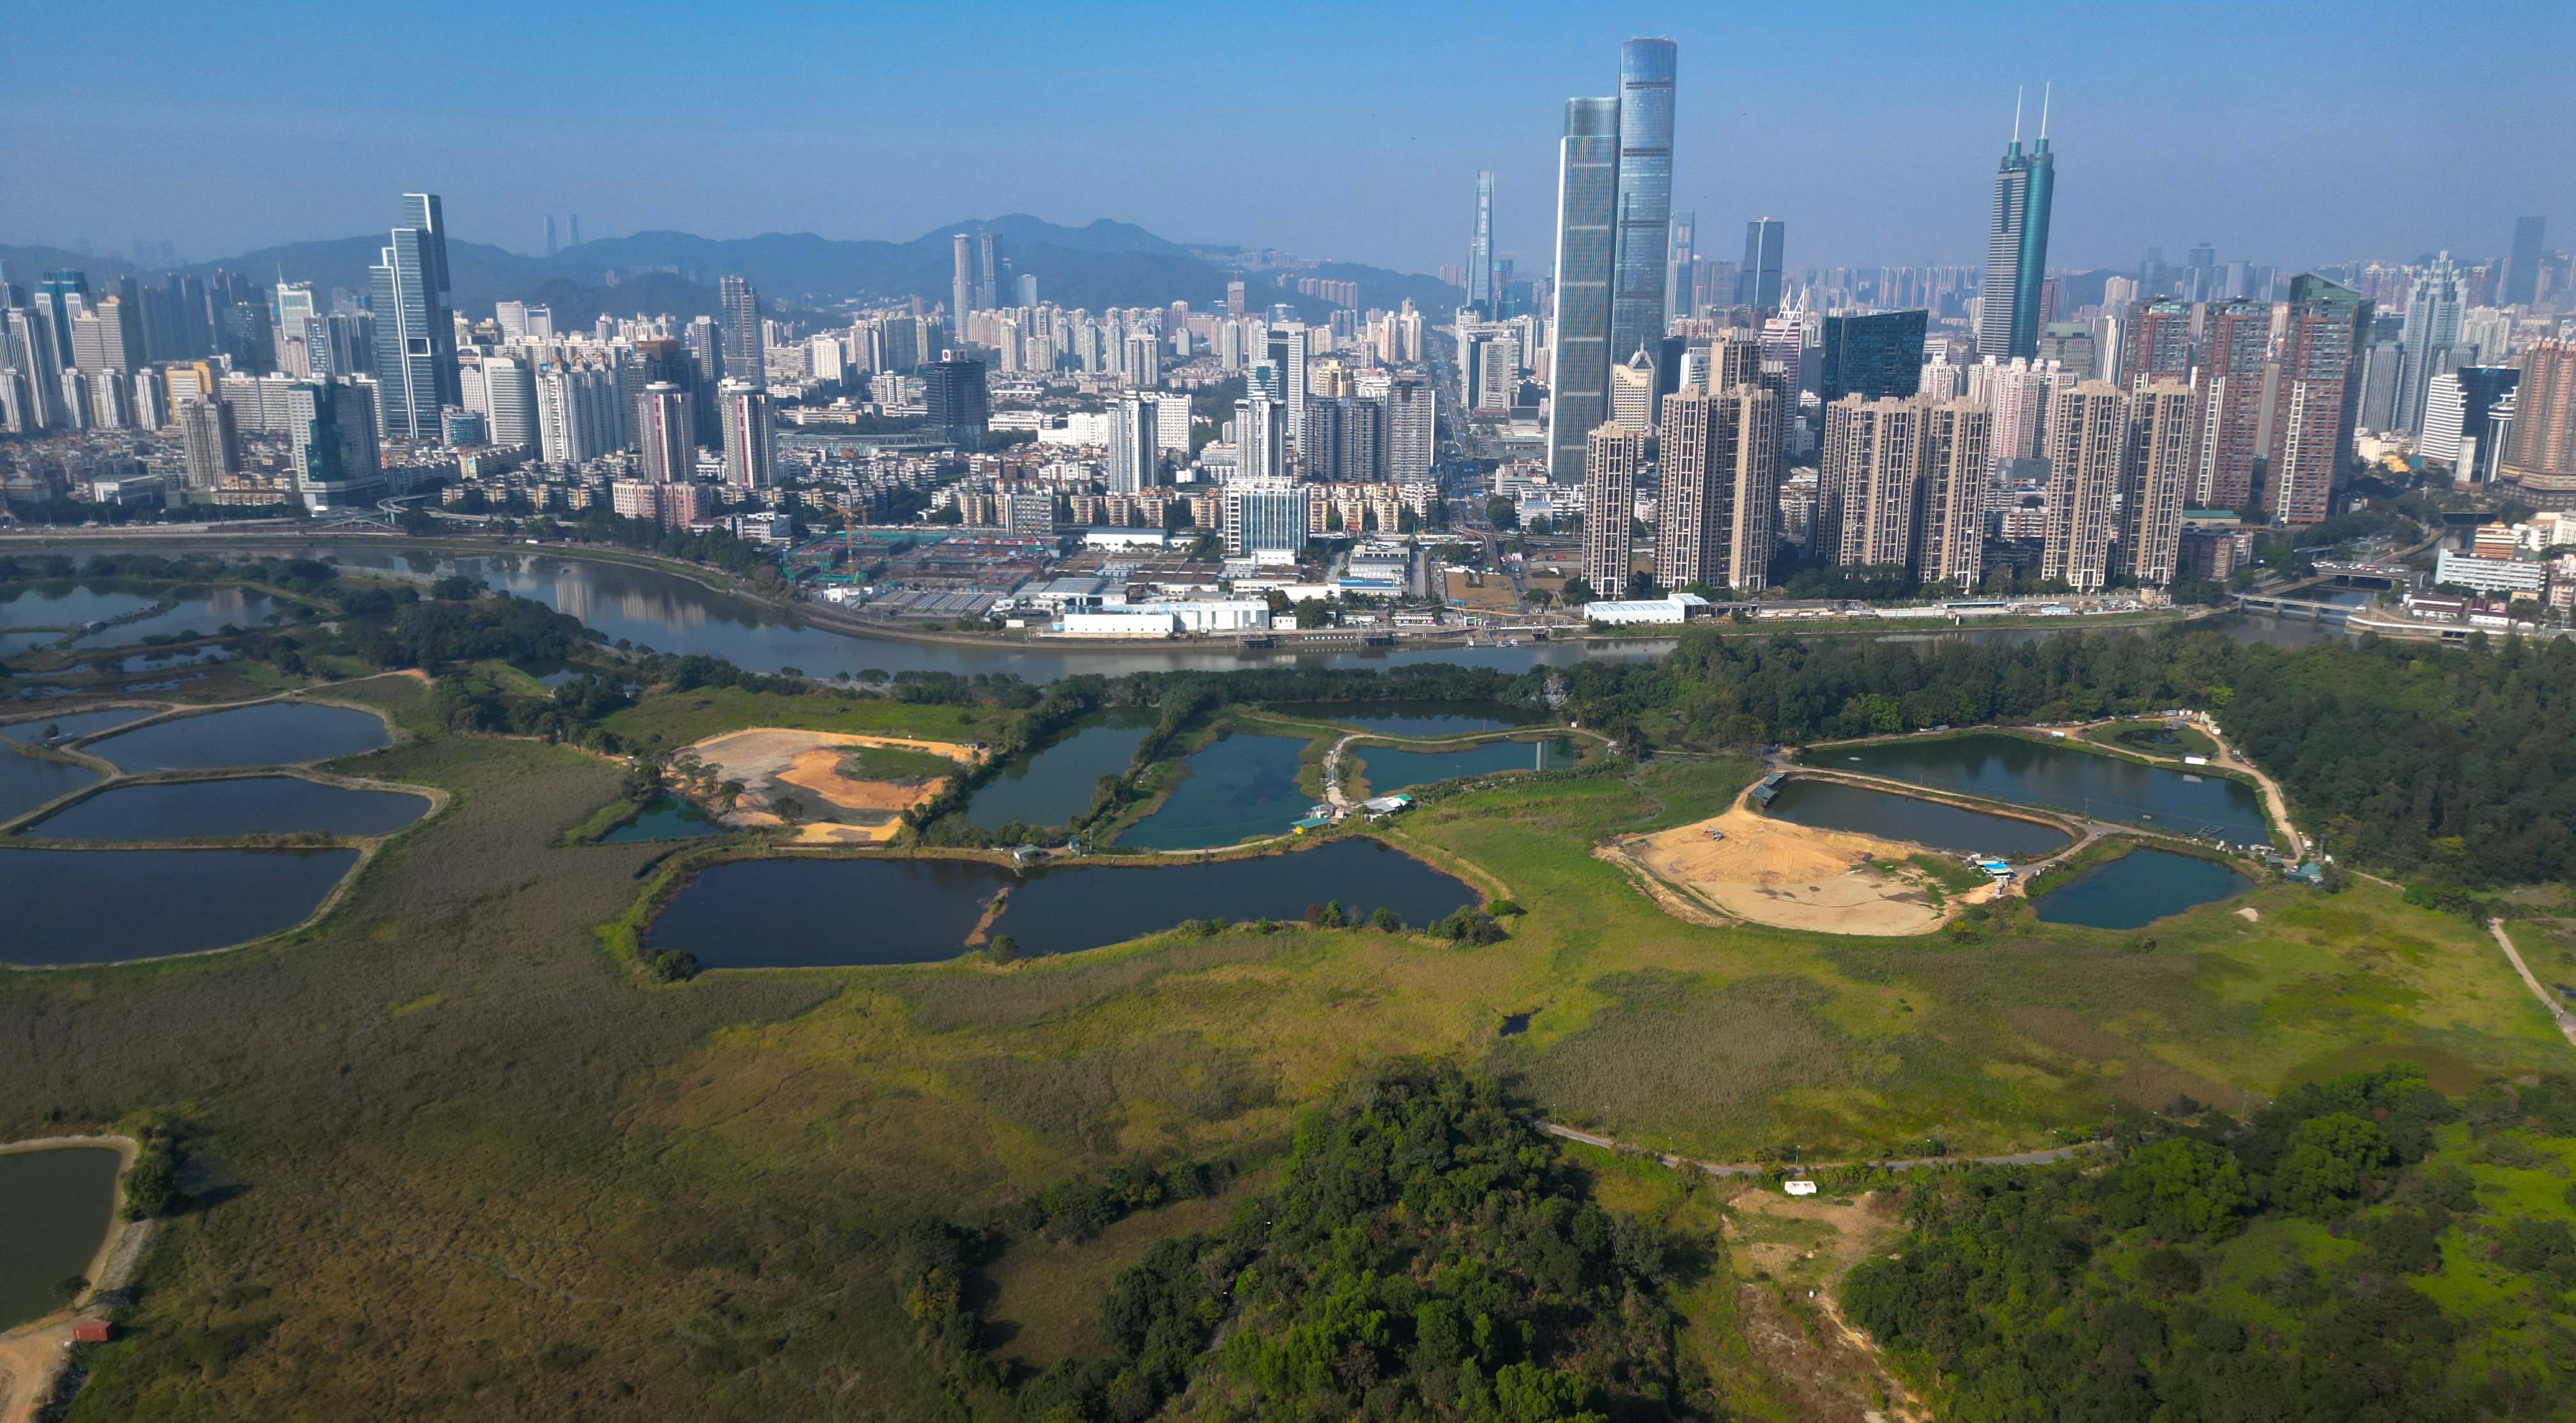 New World and China Merchants Shekou have formed a partnership to jointly develop a property project in Hong Kong’s Northern Metropolis close to the border with Shenzhen. Photo: May Tse